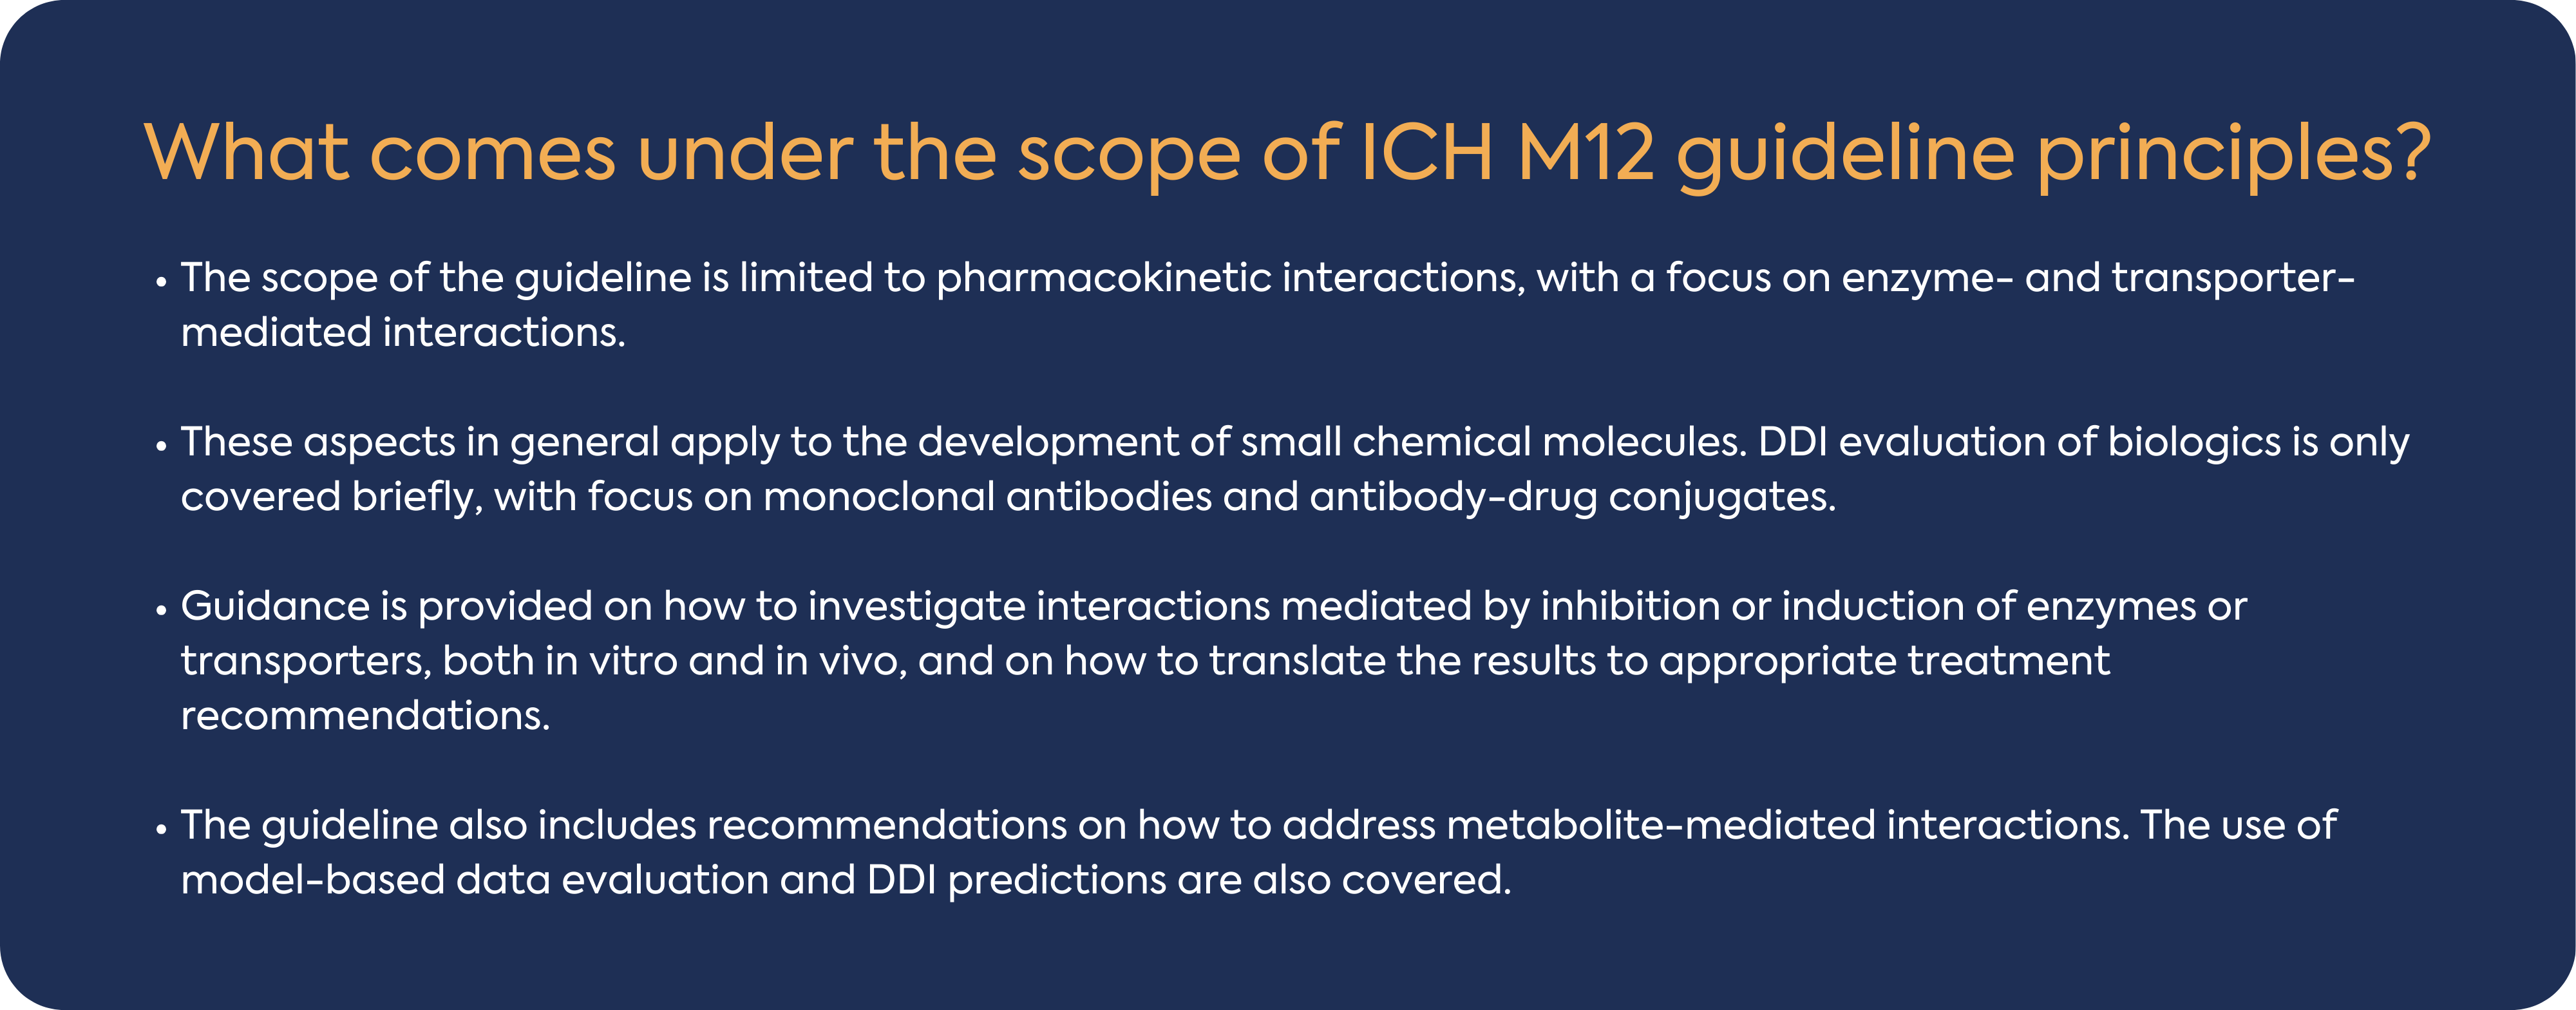 What comes under the scope of ICH M12 guideline principles?